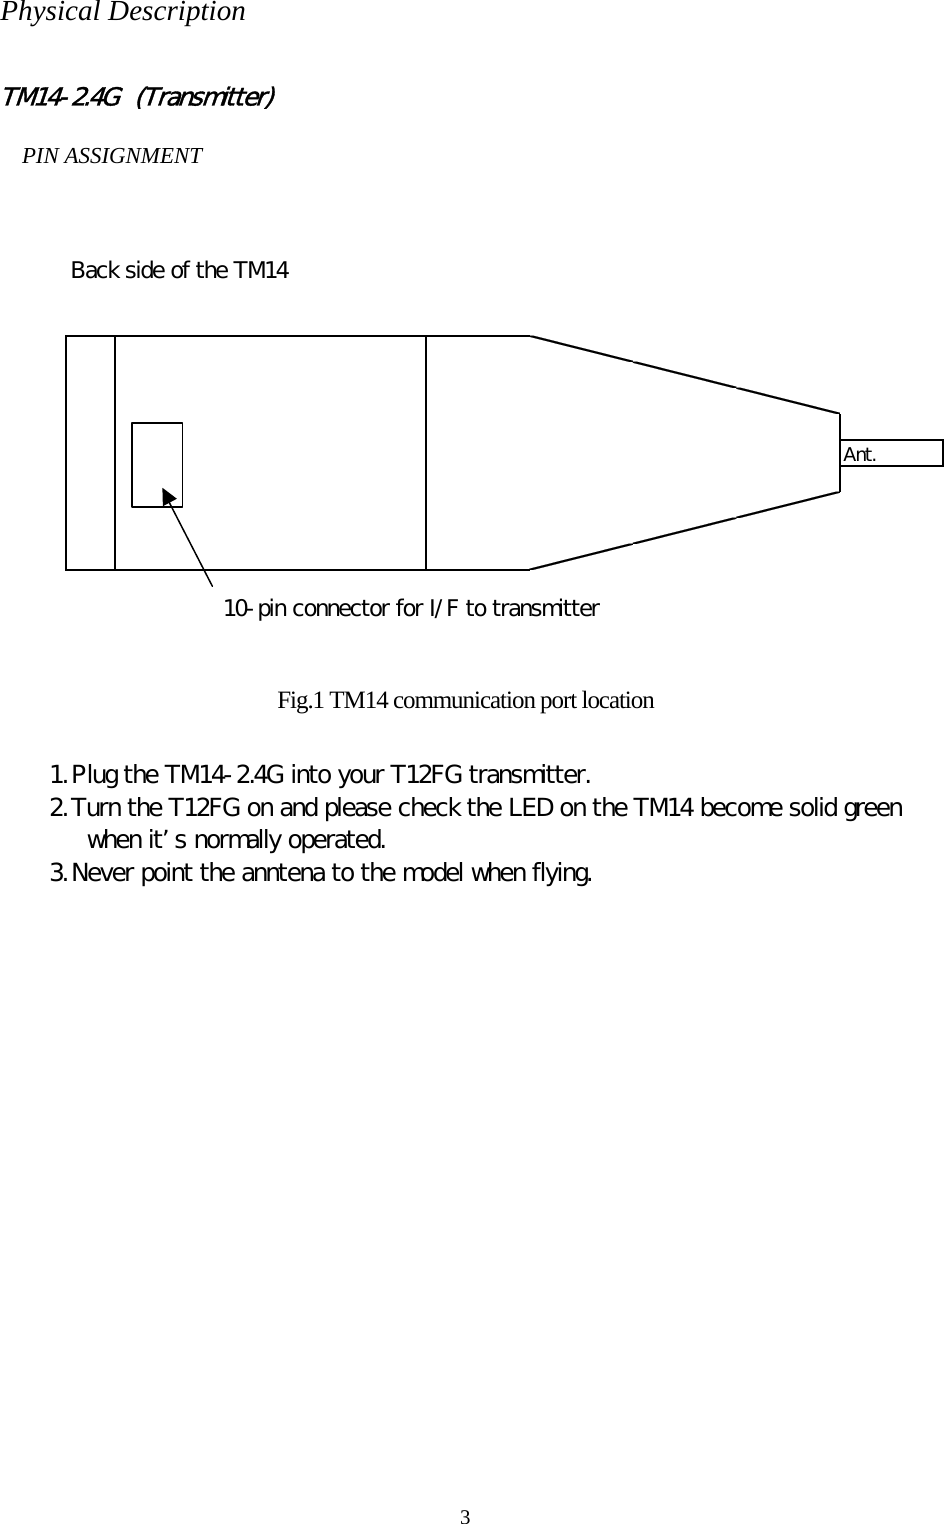 3 Physical Description  TM14-2.4G  (Transmitter)  PIN ASSIGNMENT  Back side of the TM14Ant.10-pin connector for I/F to transmitter Fig.1 TM14 communication port location  1. Plug the TM14-2.4G into your T12FG transmitter. 2. Turn the T12FG on and please check the LED on the TM14 become solid green when its normally operated. 3. Never point the anntena to the model when flying.  